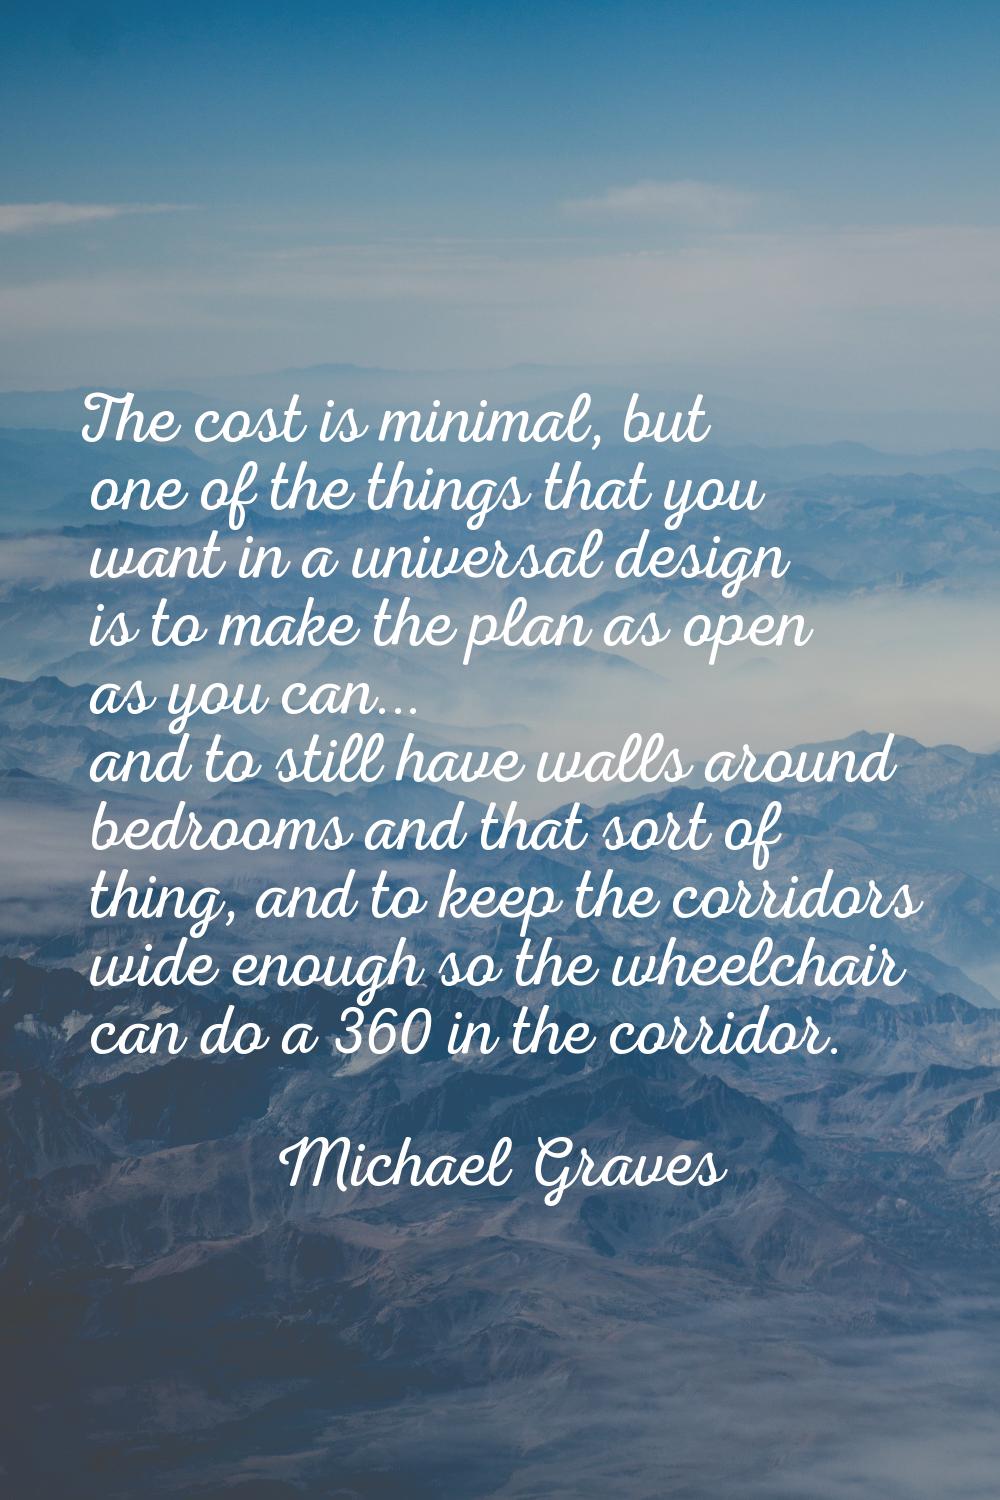 The cost is minimal, but one of the things that you want in a universal design is to make the plan 